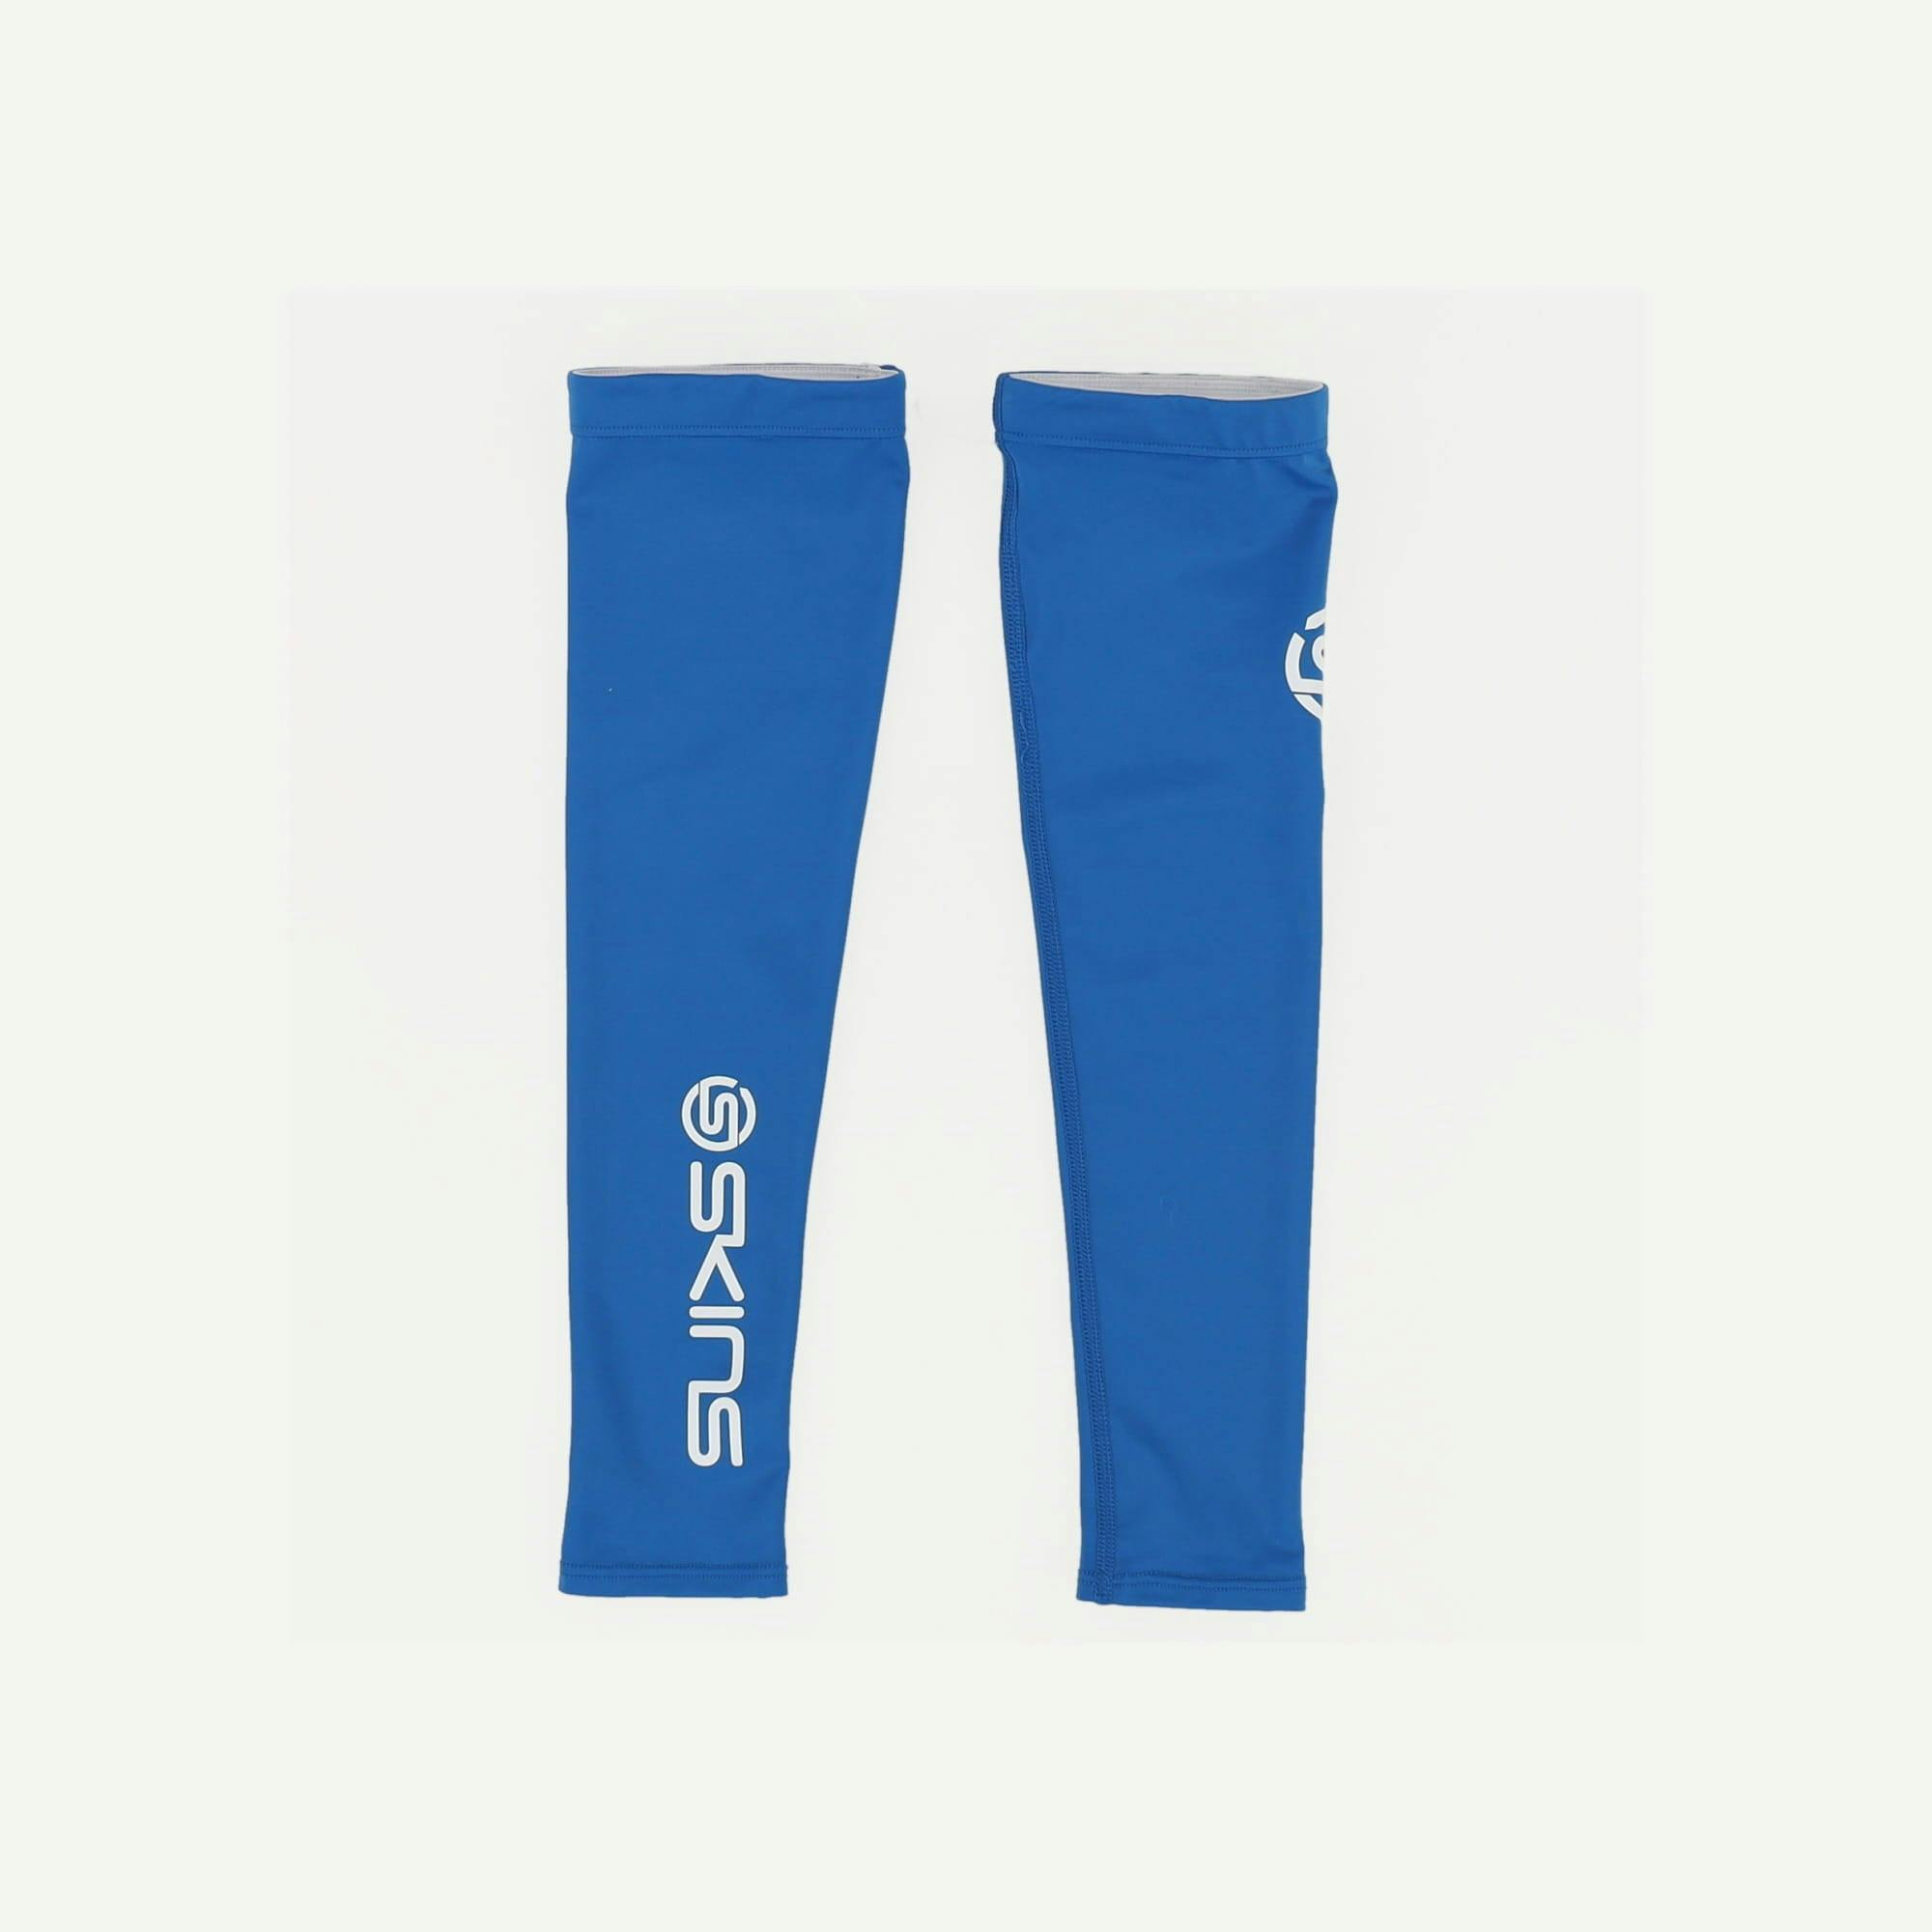 SKINS Compression As new Blue Series 1 Arm Sleeves